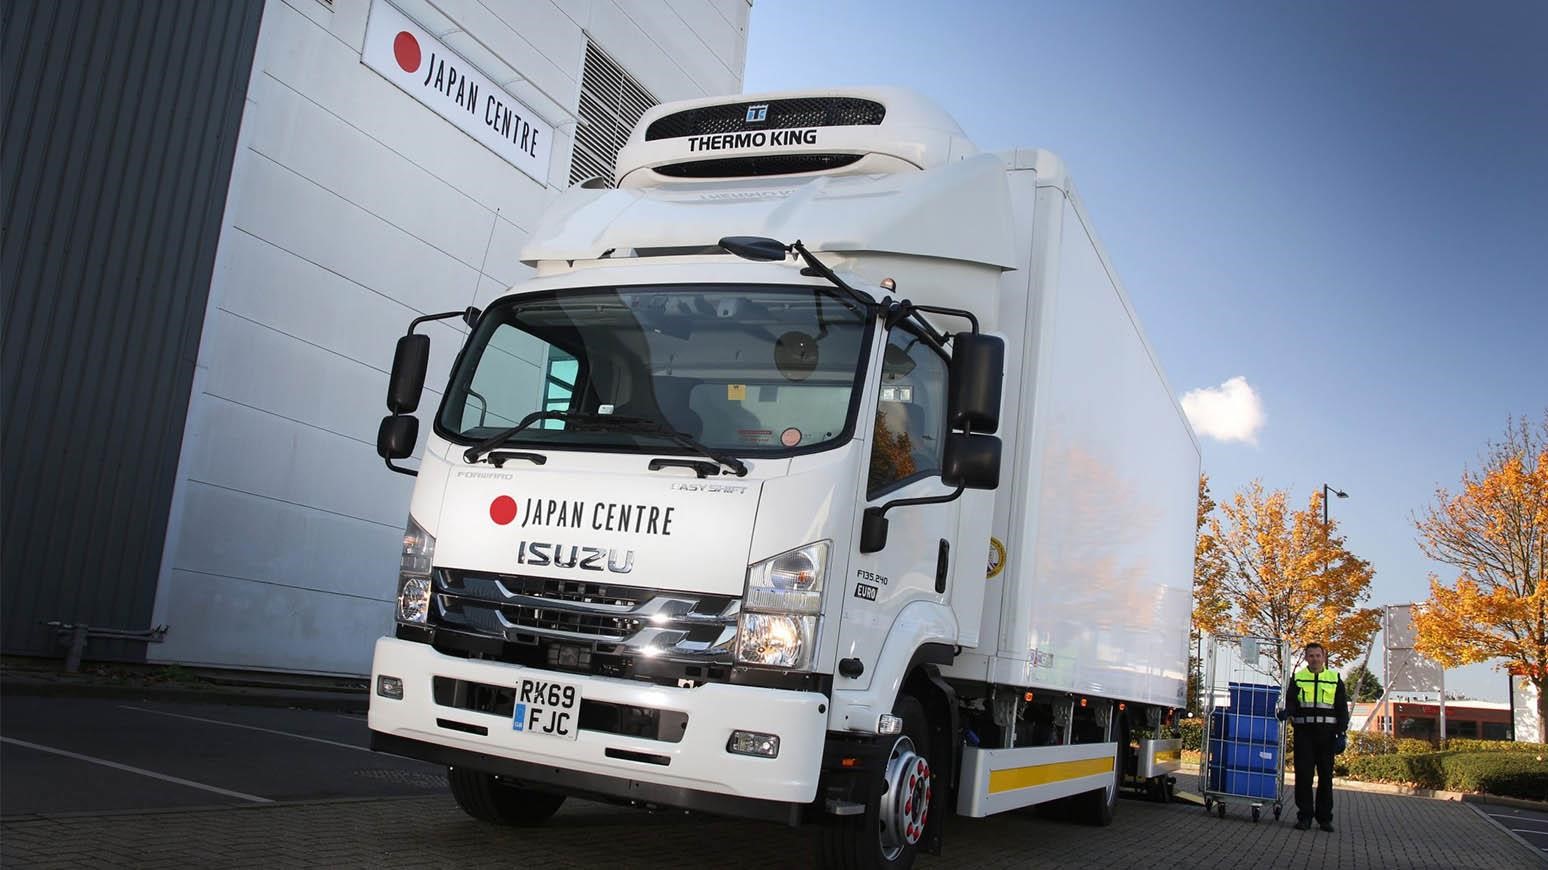 Japan Centre Group Adds Isuzu F-Series Truck To Distribute Japanese Goods In London, Manchester & Oxford